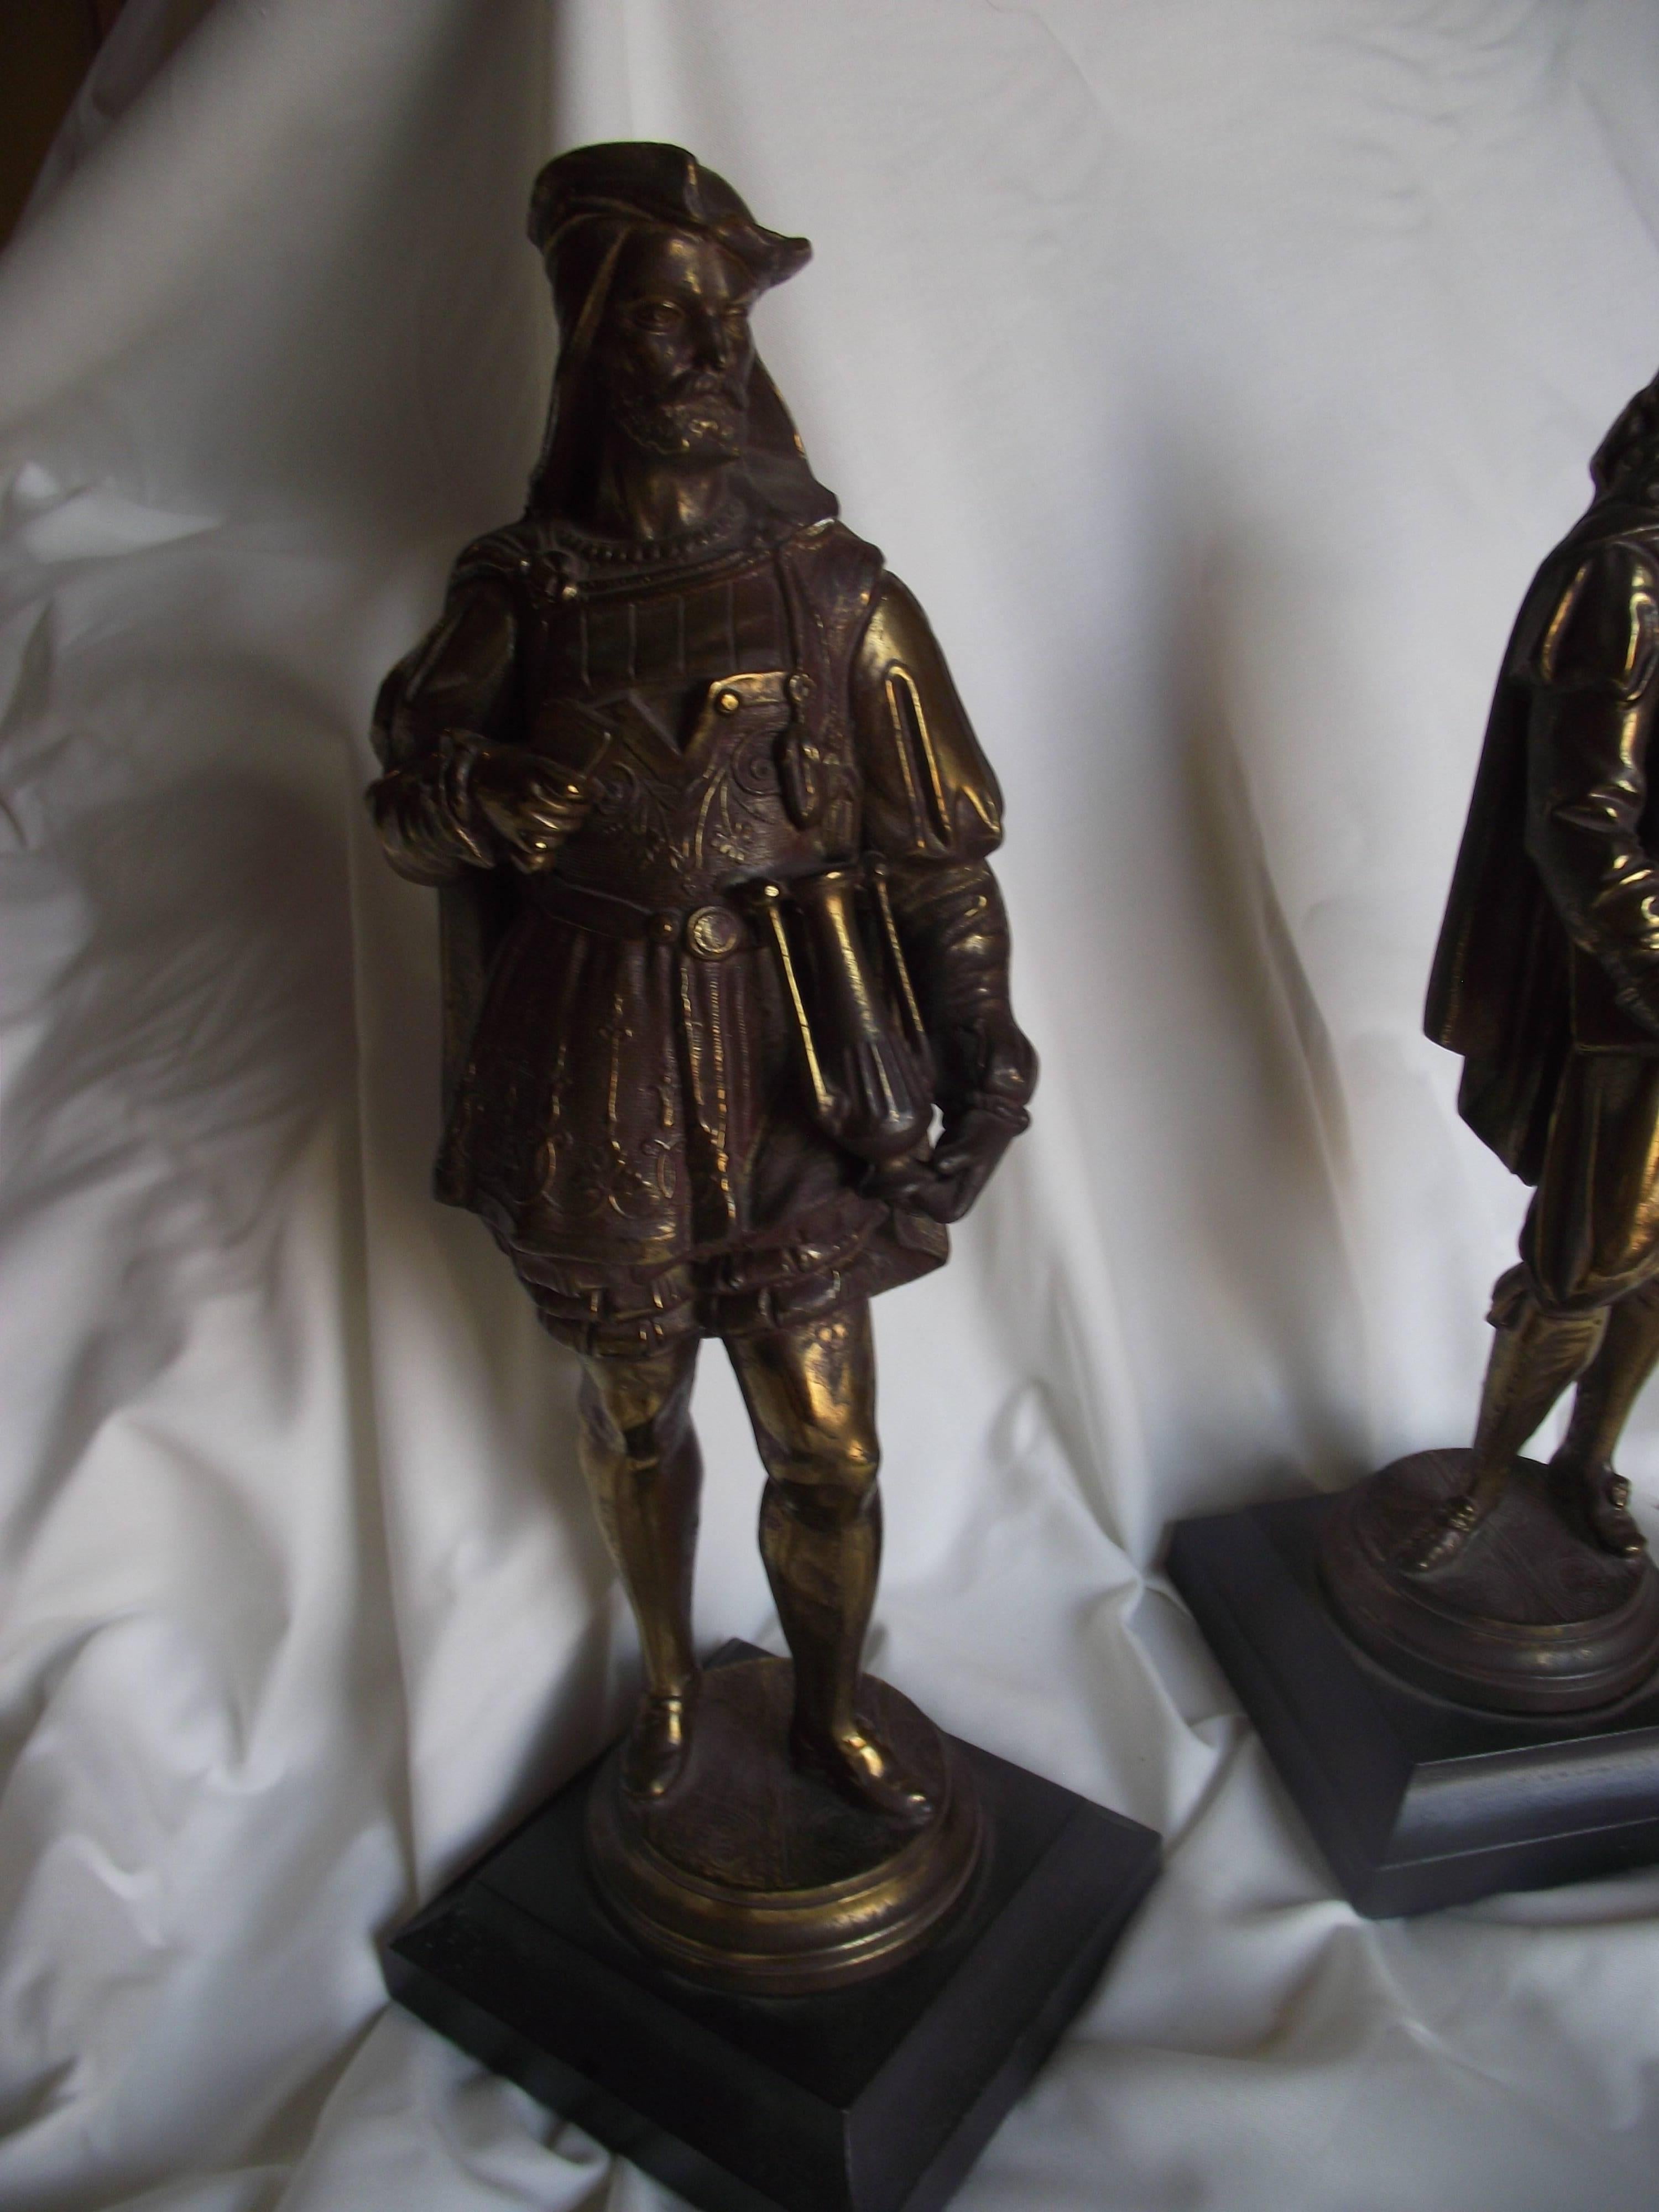 These impressive sculptures represent a painter and a potter are specter with a bronze finish. The finish is original and in remarkably good condition. The detail is crisp and distinct.

The would be a great addition to a mantel, tabletop display